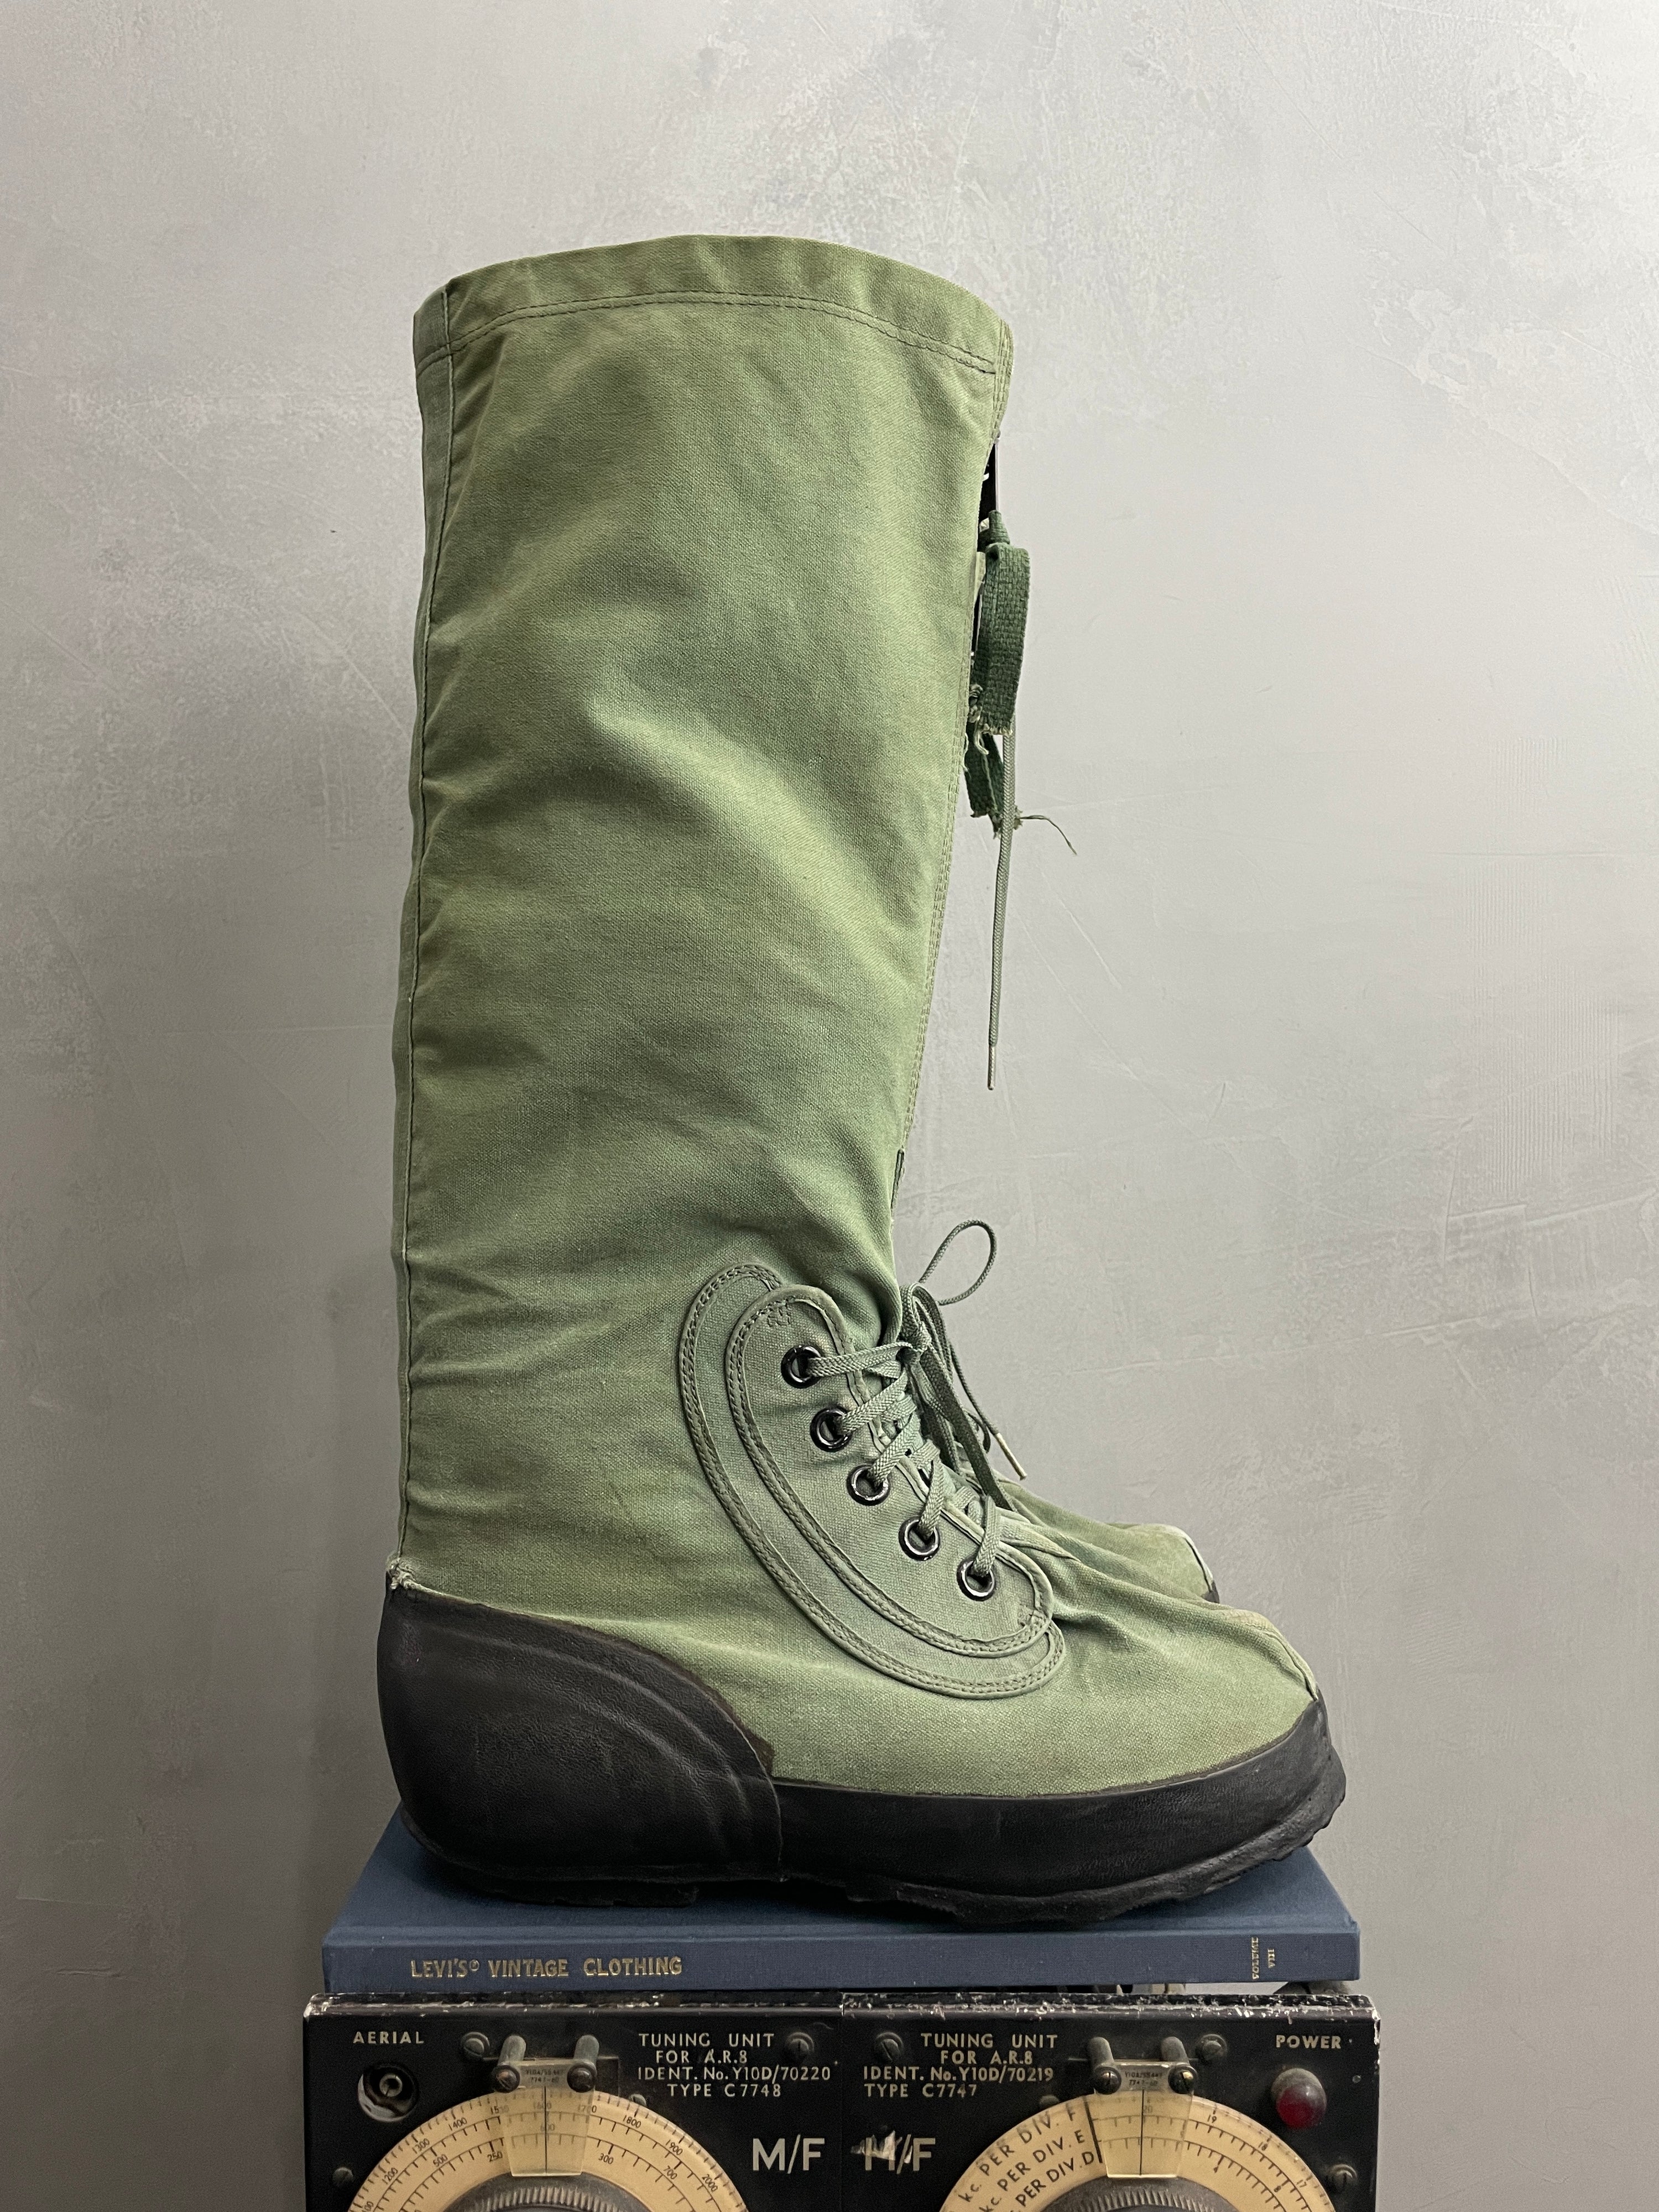 Type N-1B Military Boots [10]